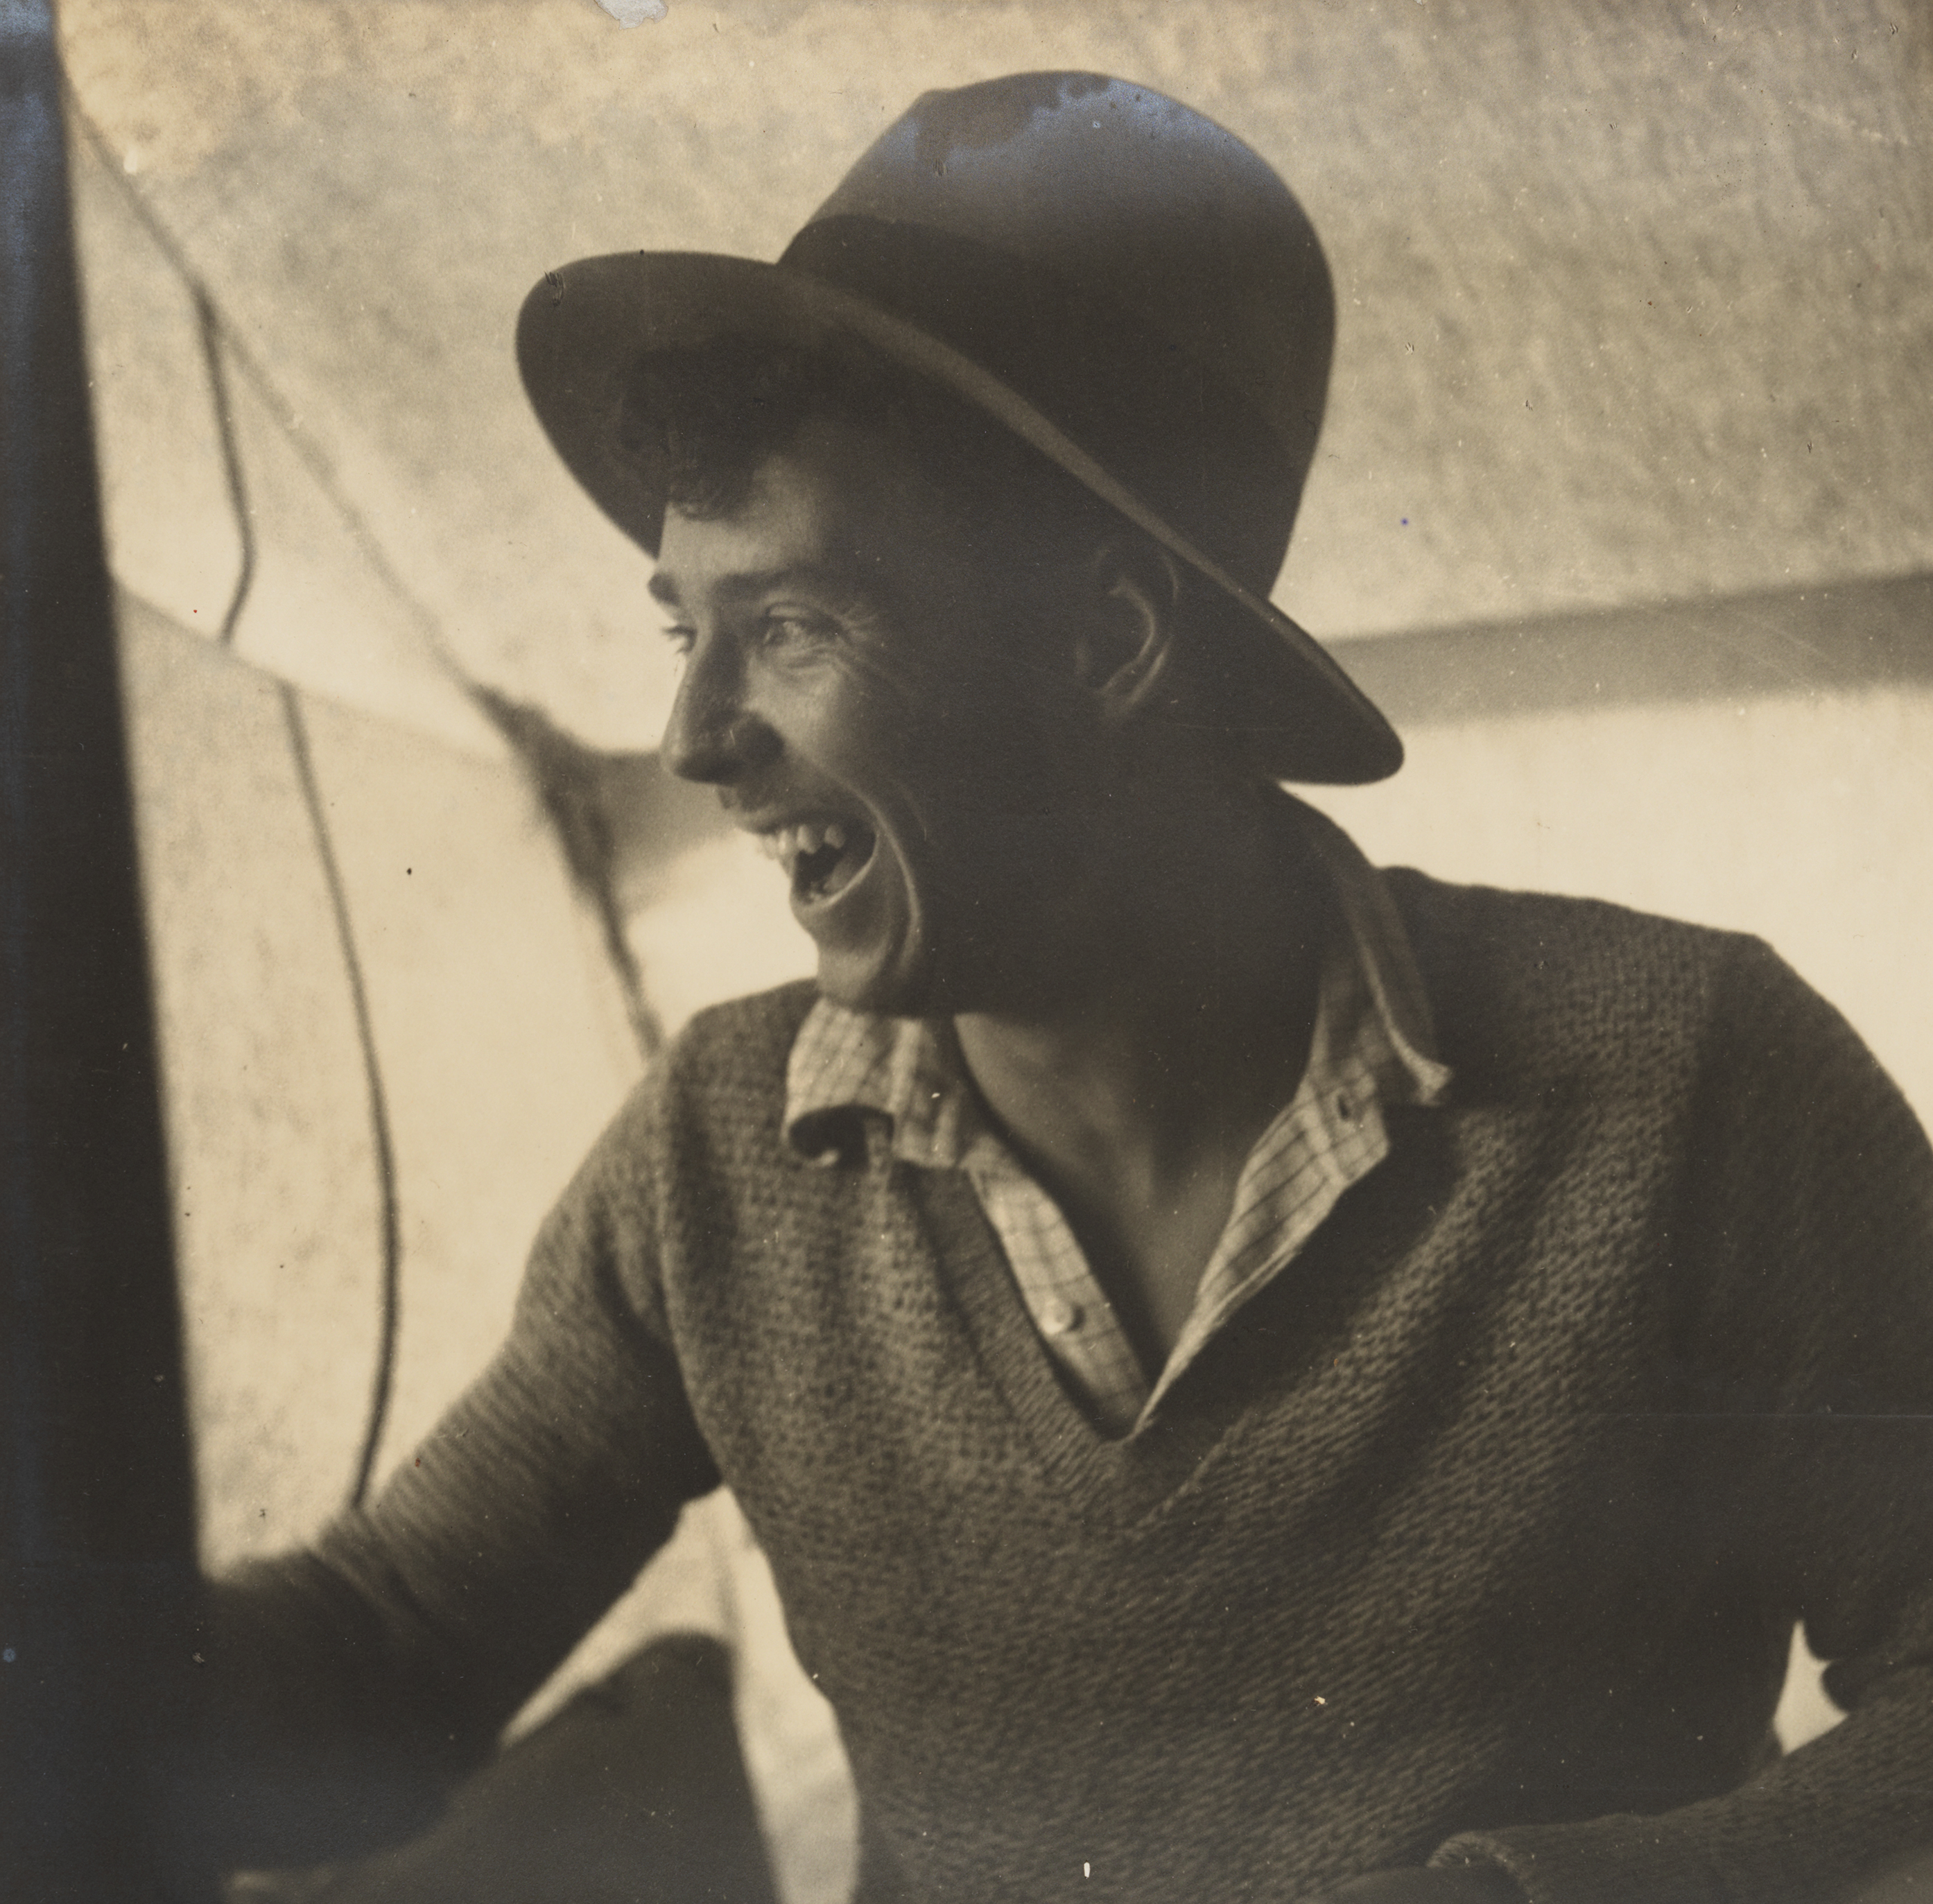 A sepia photograph of a man wearing a hat, checked shirt and wollen jumper sitting inside a canvas structure, looking off to the side laughing.